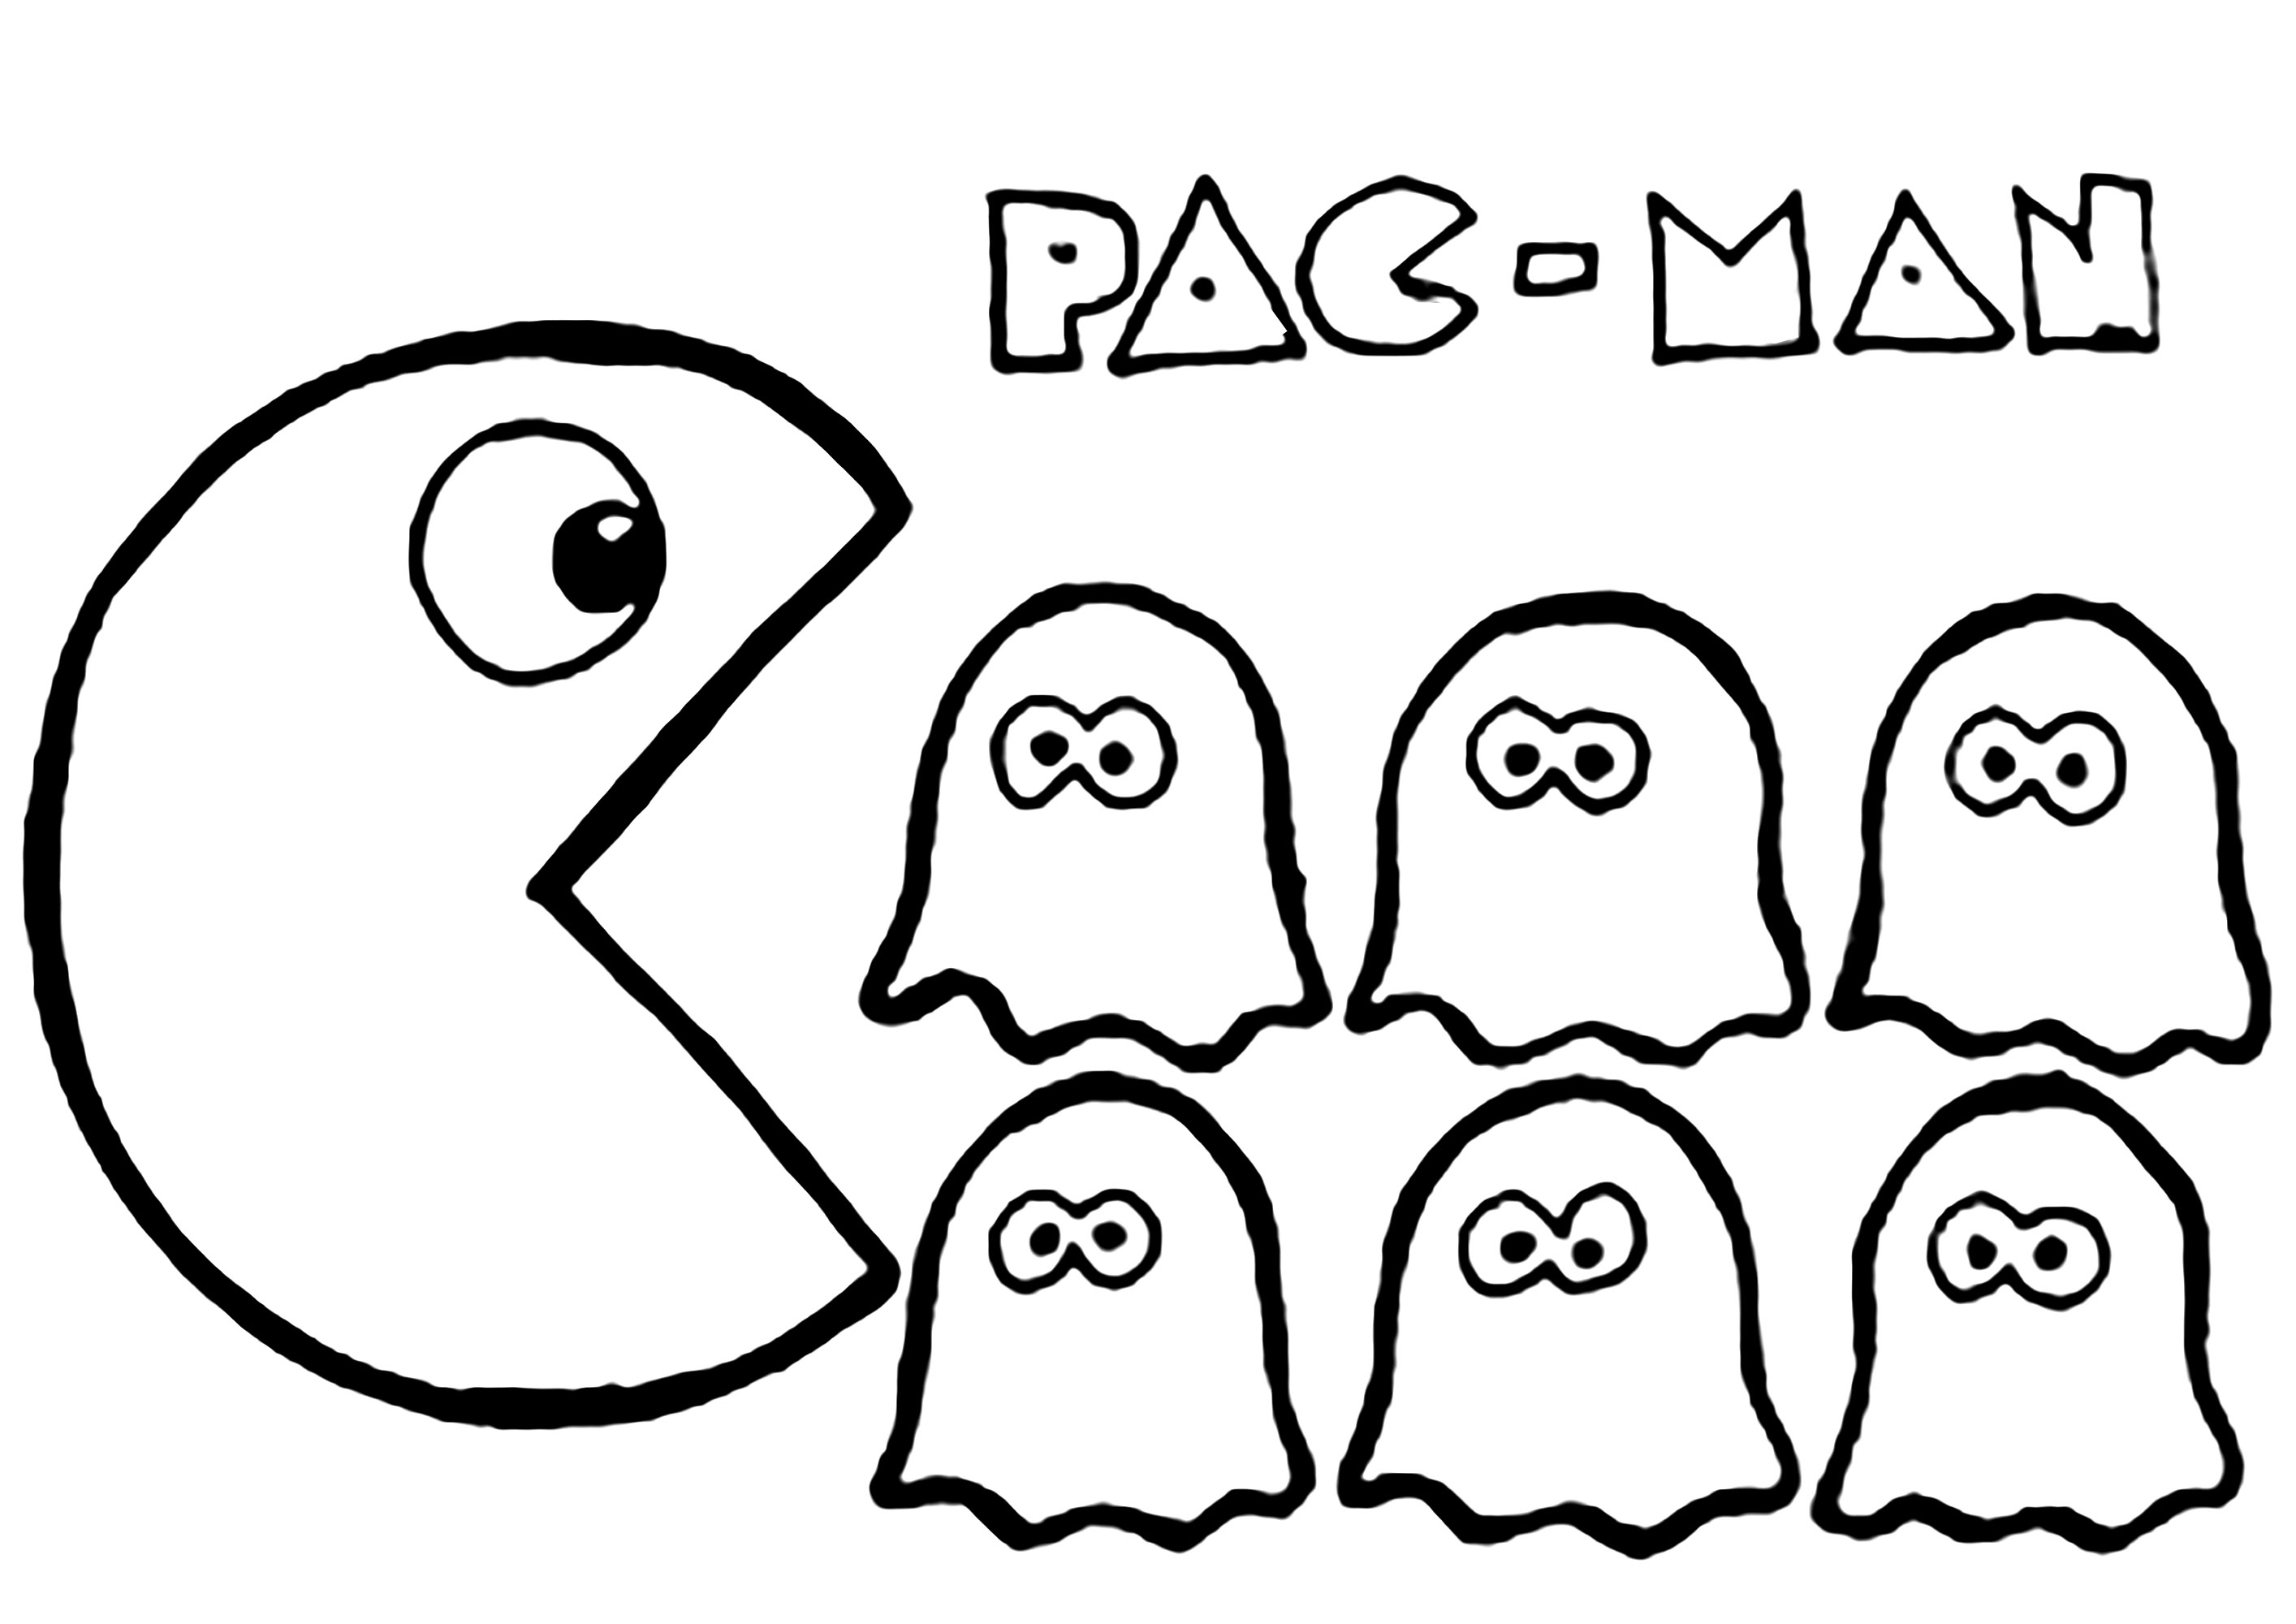 Pacman and ghosts